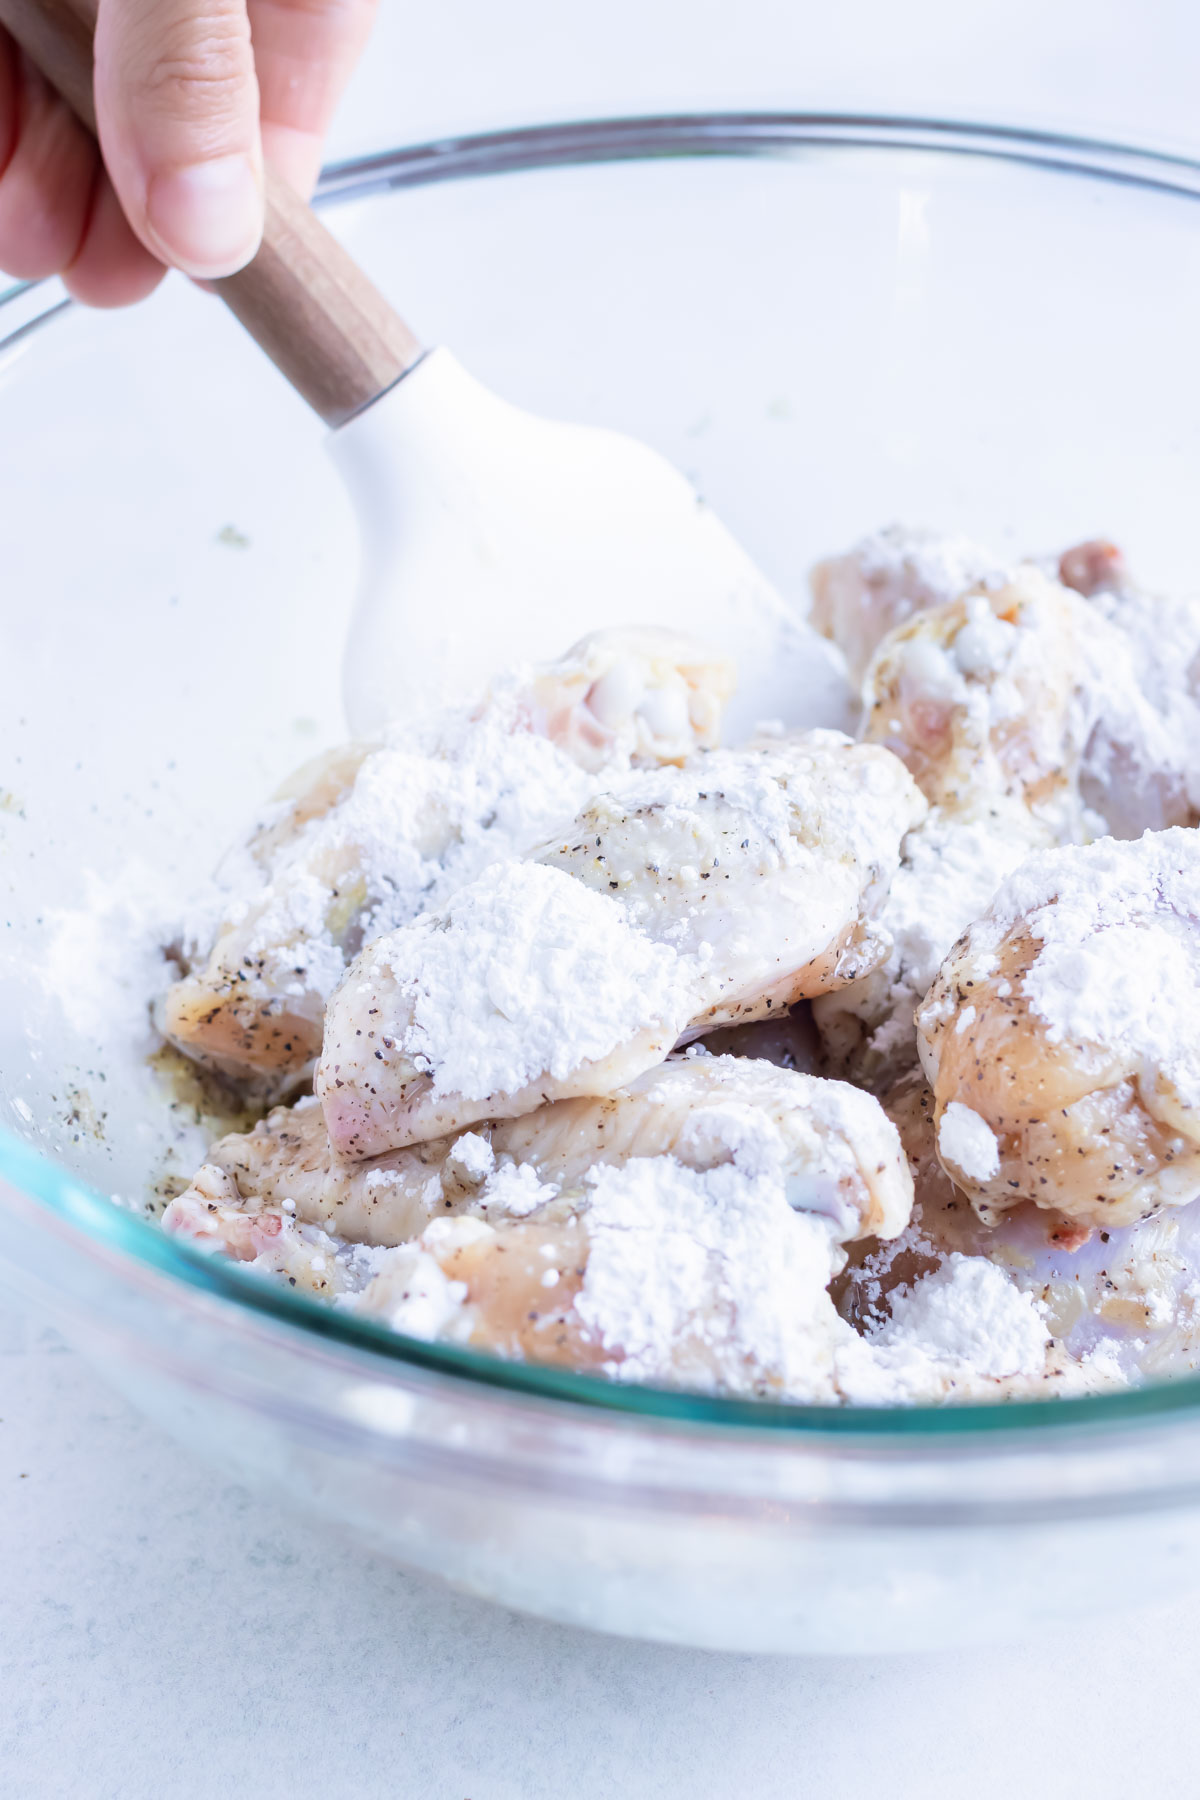 Corn starch is sprinkled on the uncooked chicken wings before air frying.